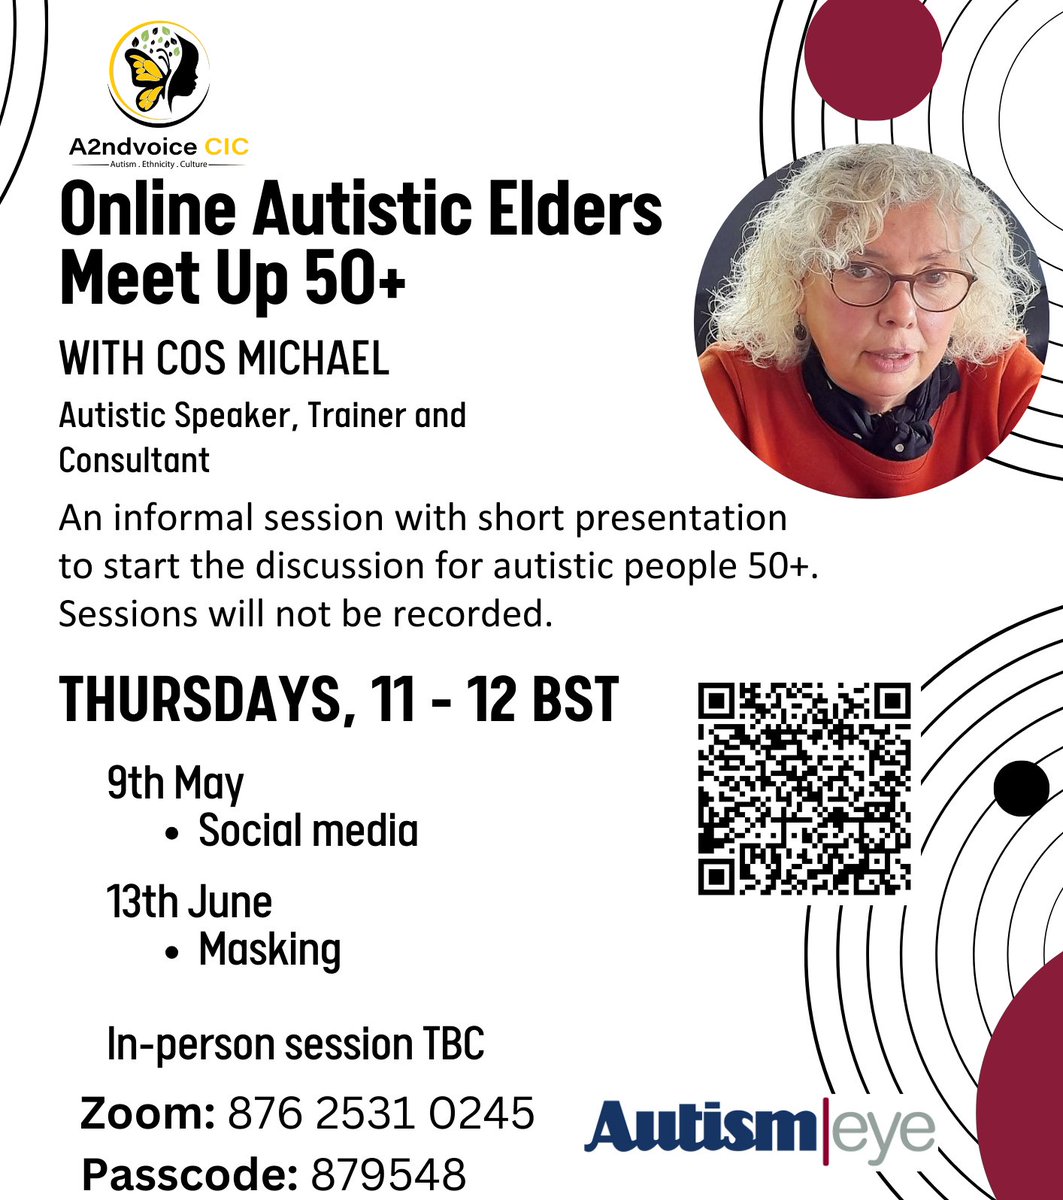 Online Autistic Elders Meet Up 50+ with Cos Michael This Thursday 9 May Topic: Autism and Social Media Mini presentation to open discussion. Session is not recorded. us06web.zoom.us/meeting/regist… #AutisticElderly #Elderly #Autism